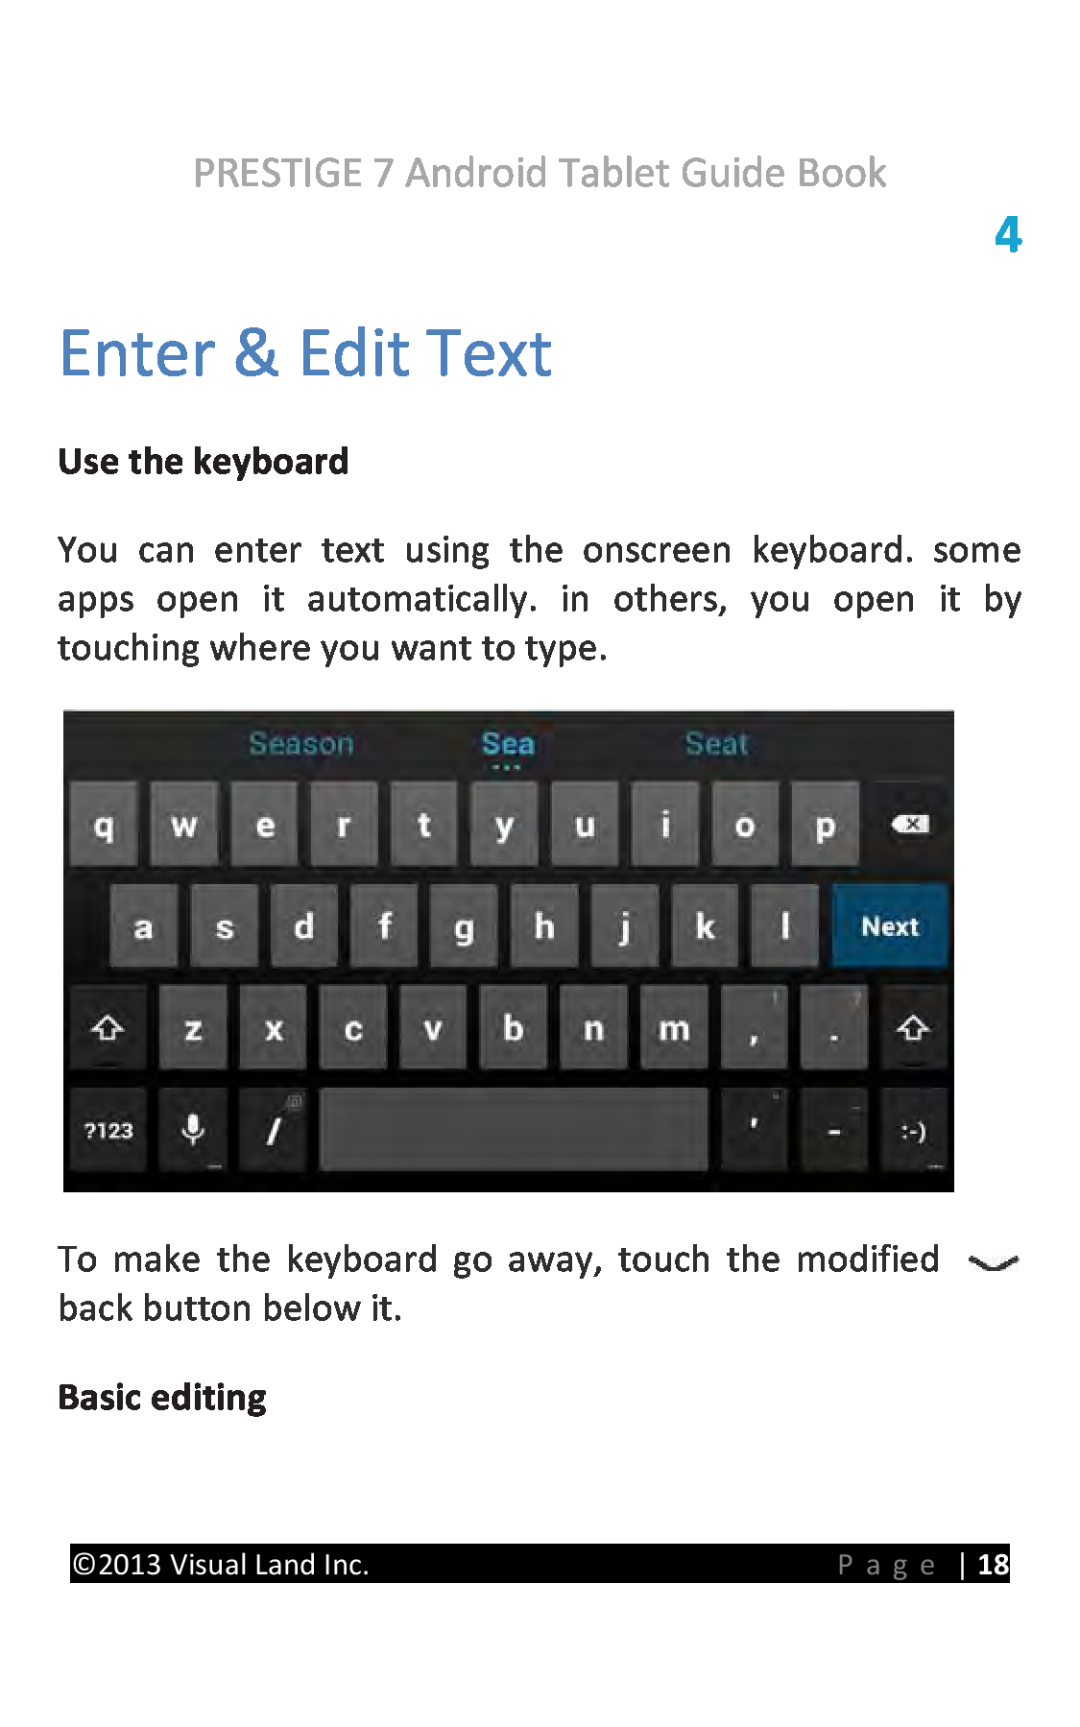 Visual Land ME-107-L-8GB-PRP Enter & Edit Text, Use the keyboard, Basic editing, PRESTIGE 7 Android Tablet Guide Book 